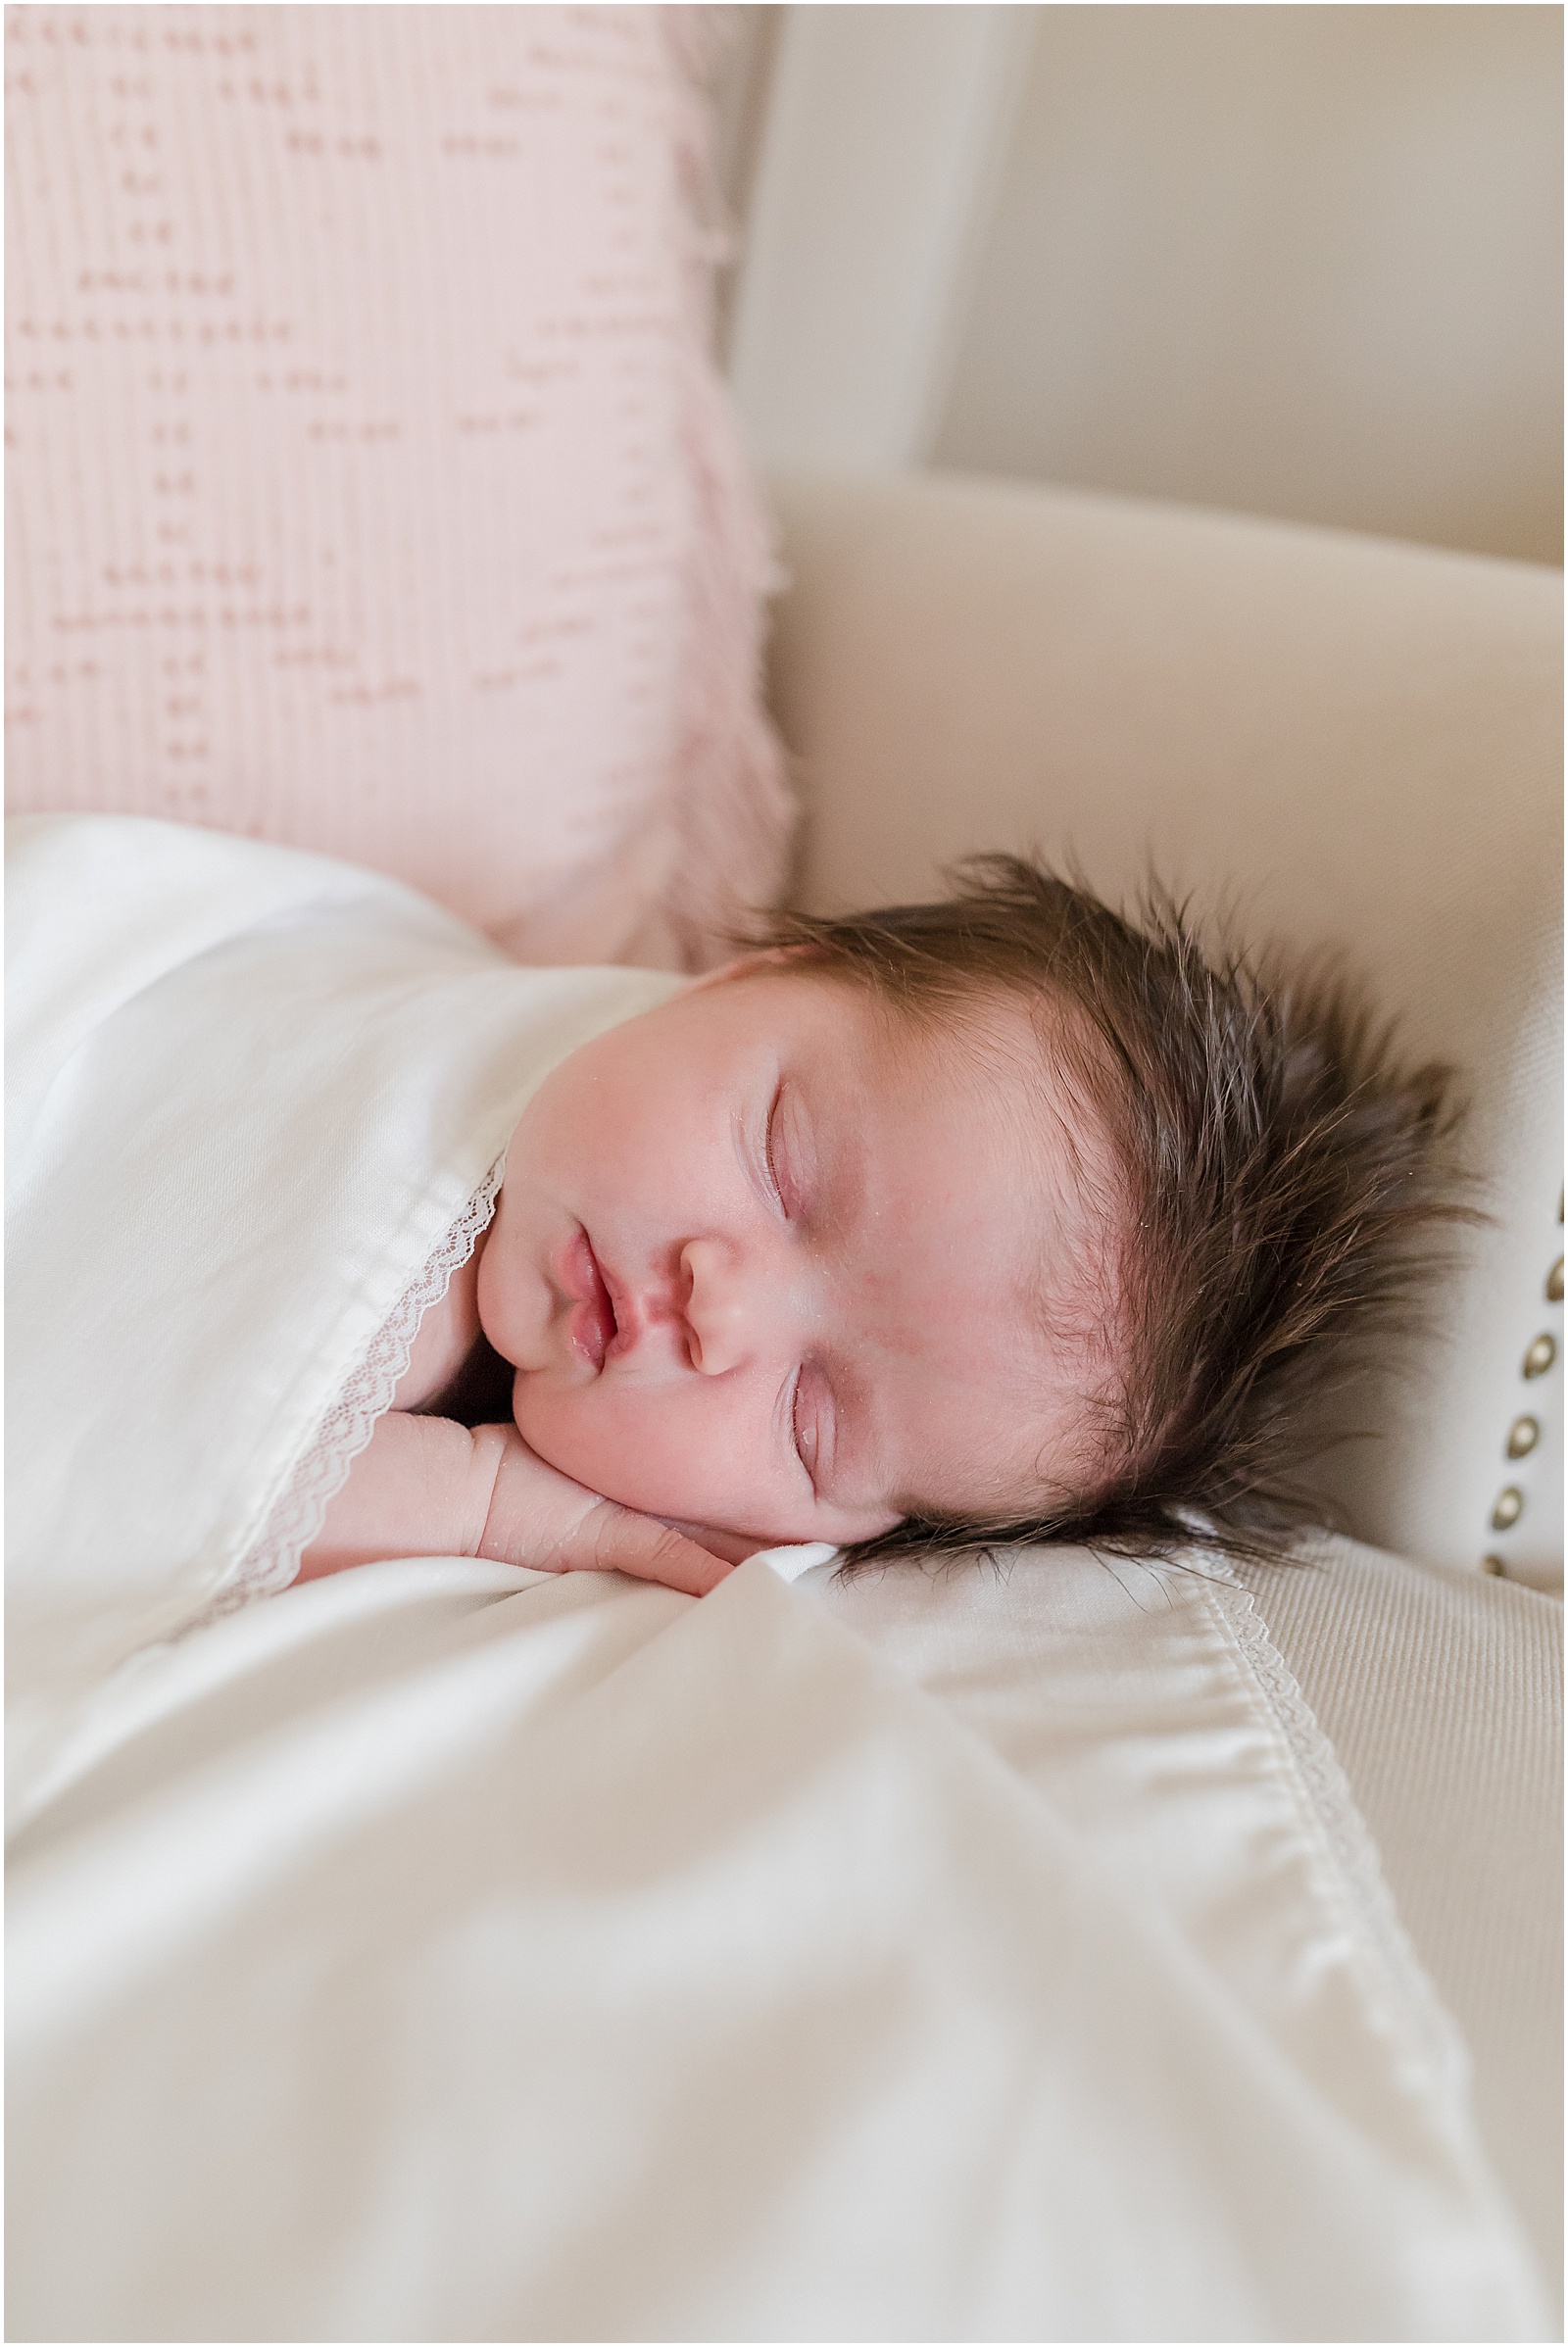 Newborn portraits of a family in their home by Greenville photographer Molly Hensley